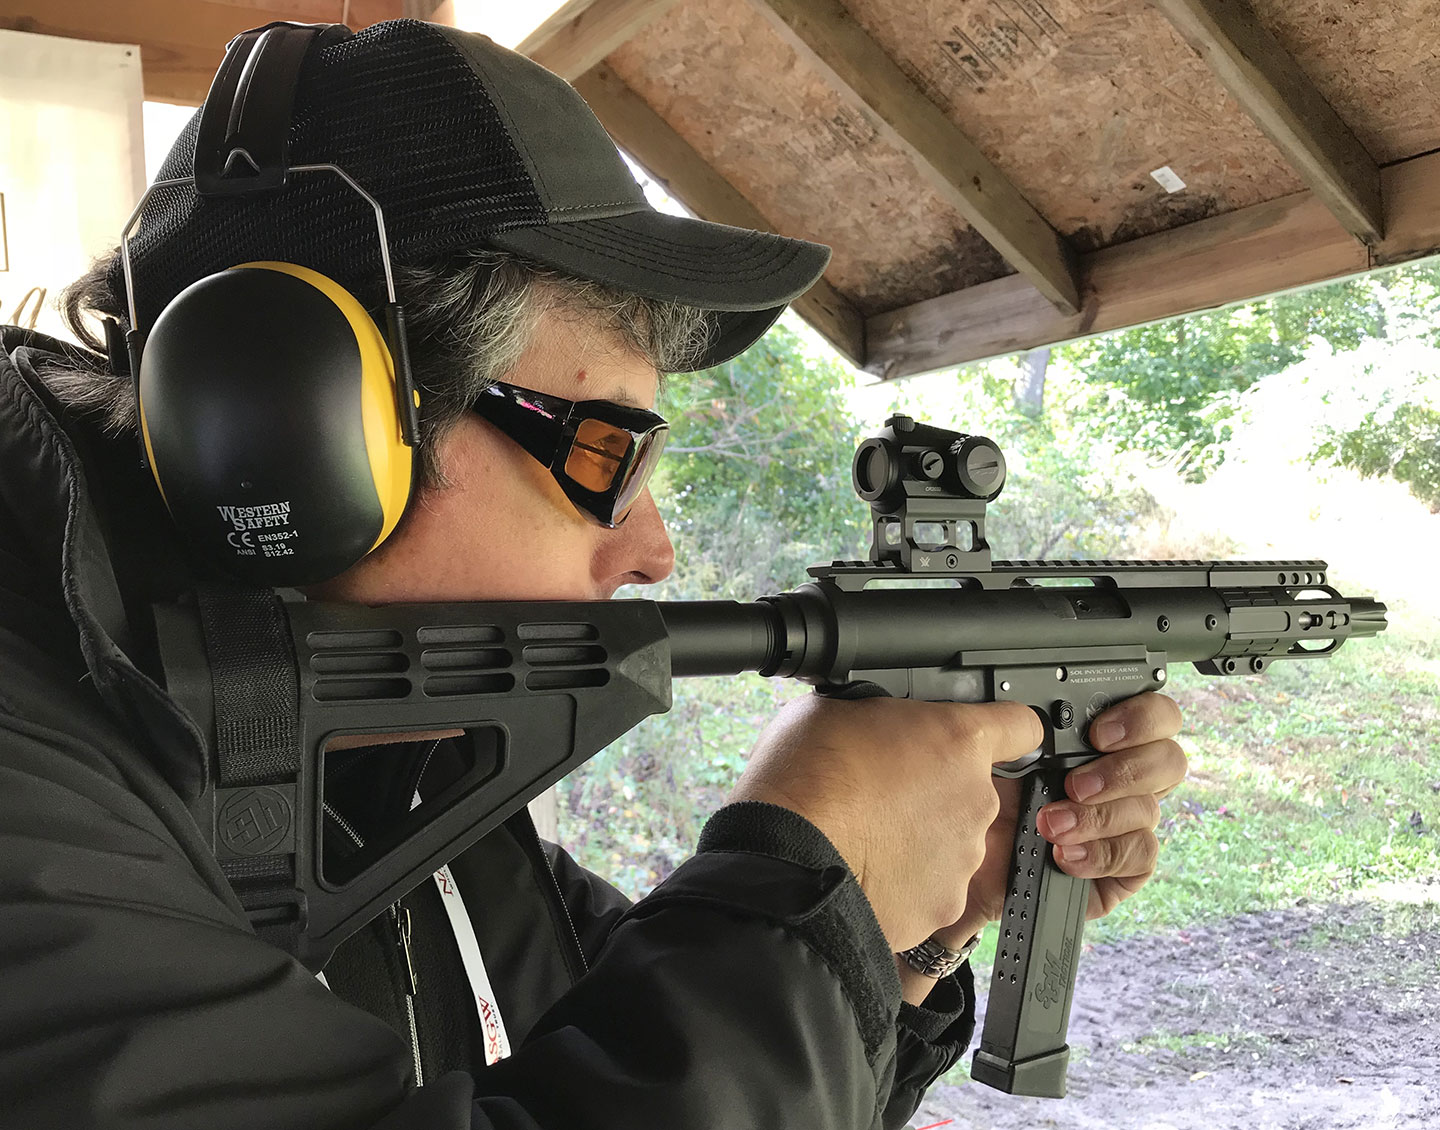 NASGW Range Day 2018 and Firearms News Was There! - Firearms